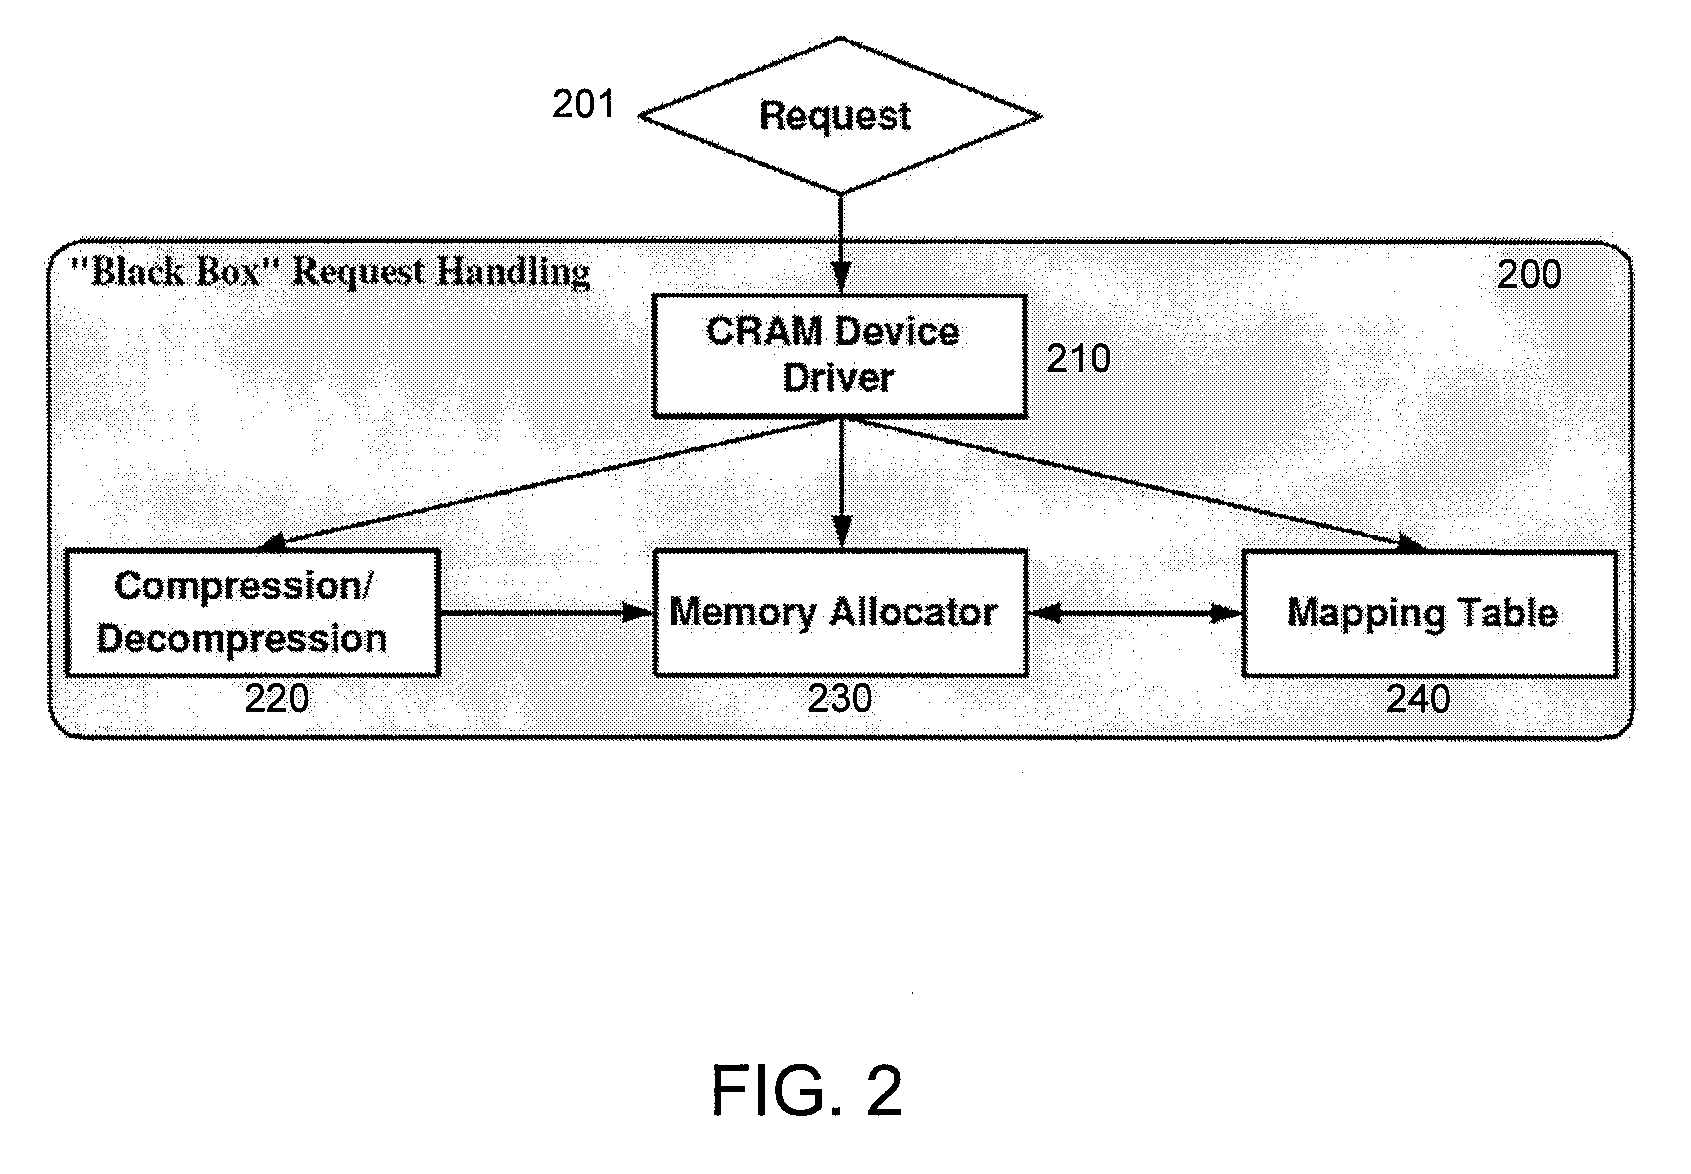 Operating System-Based Memory Compression for Embedded Systems